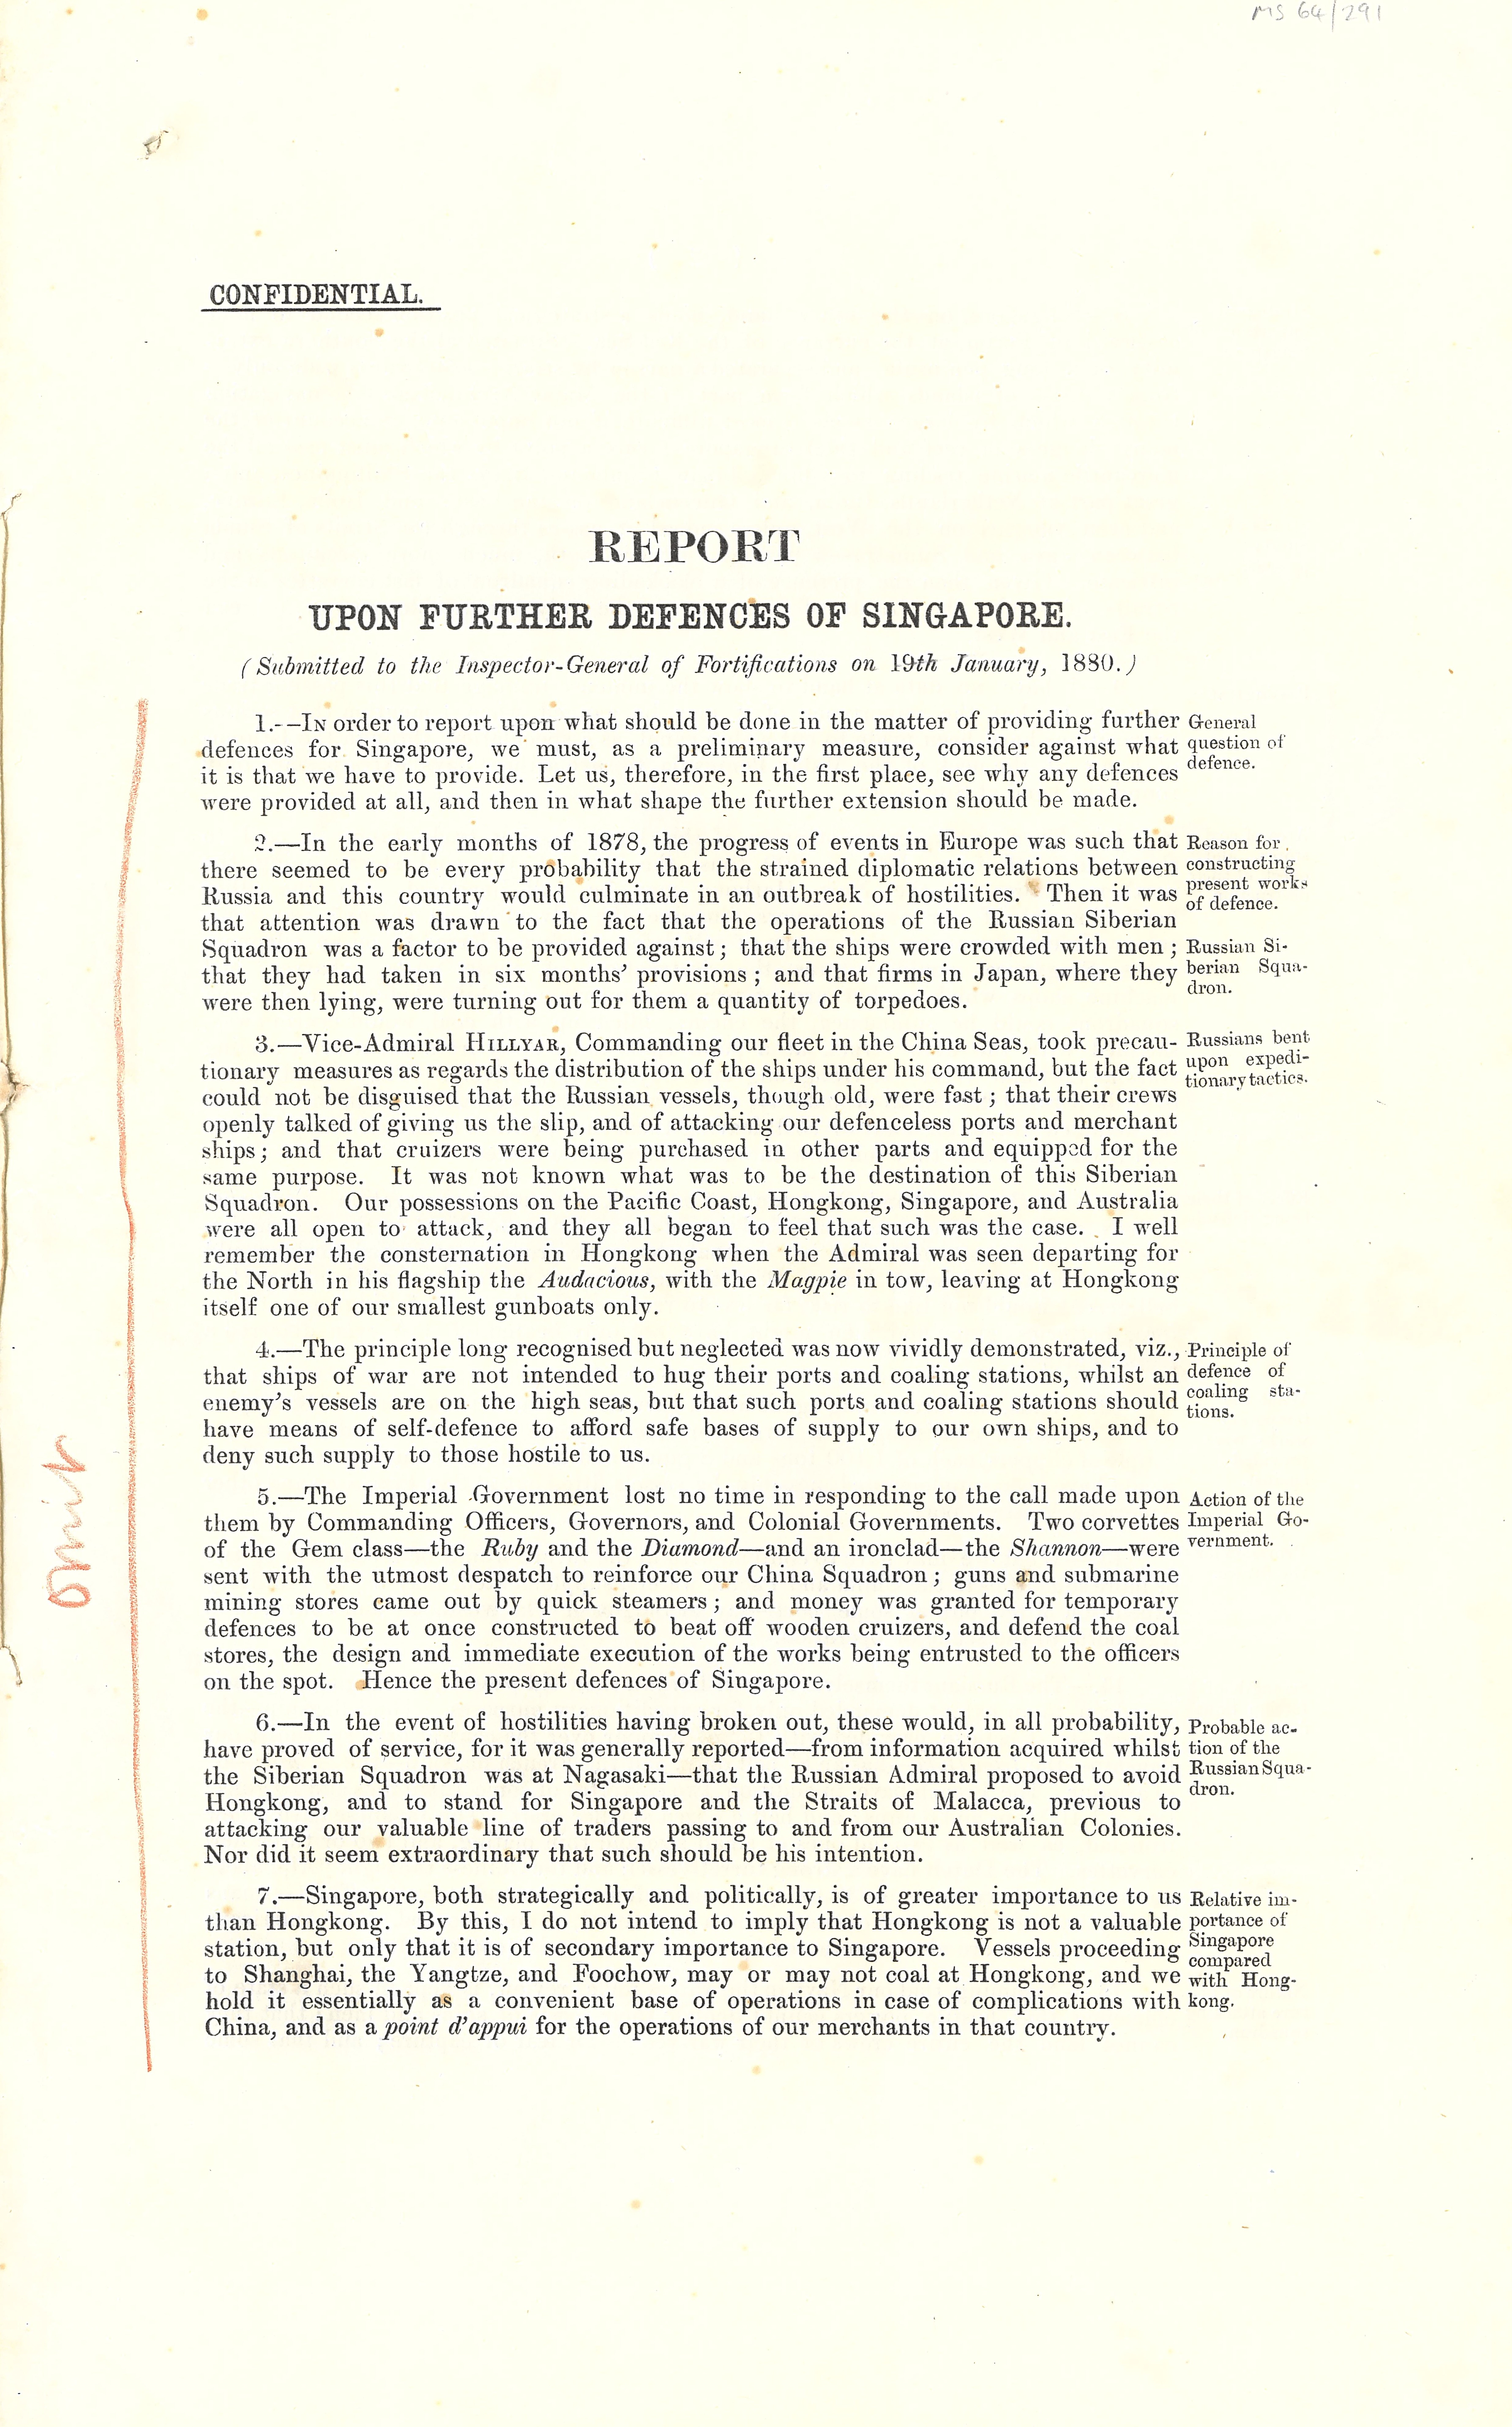 A draft of a report on the defences of Singapore, from Parnell’s papers as president of the Singapore Defence Committee, with his annotations and notes on business [MS 64/291]